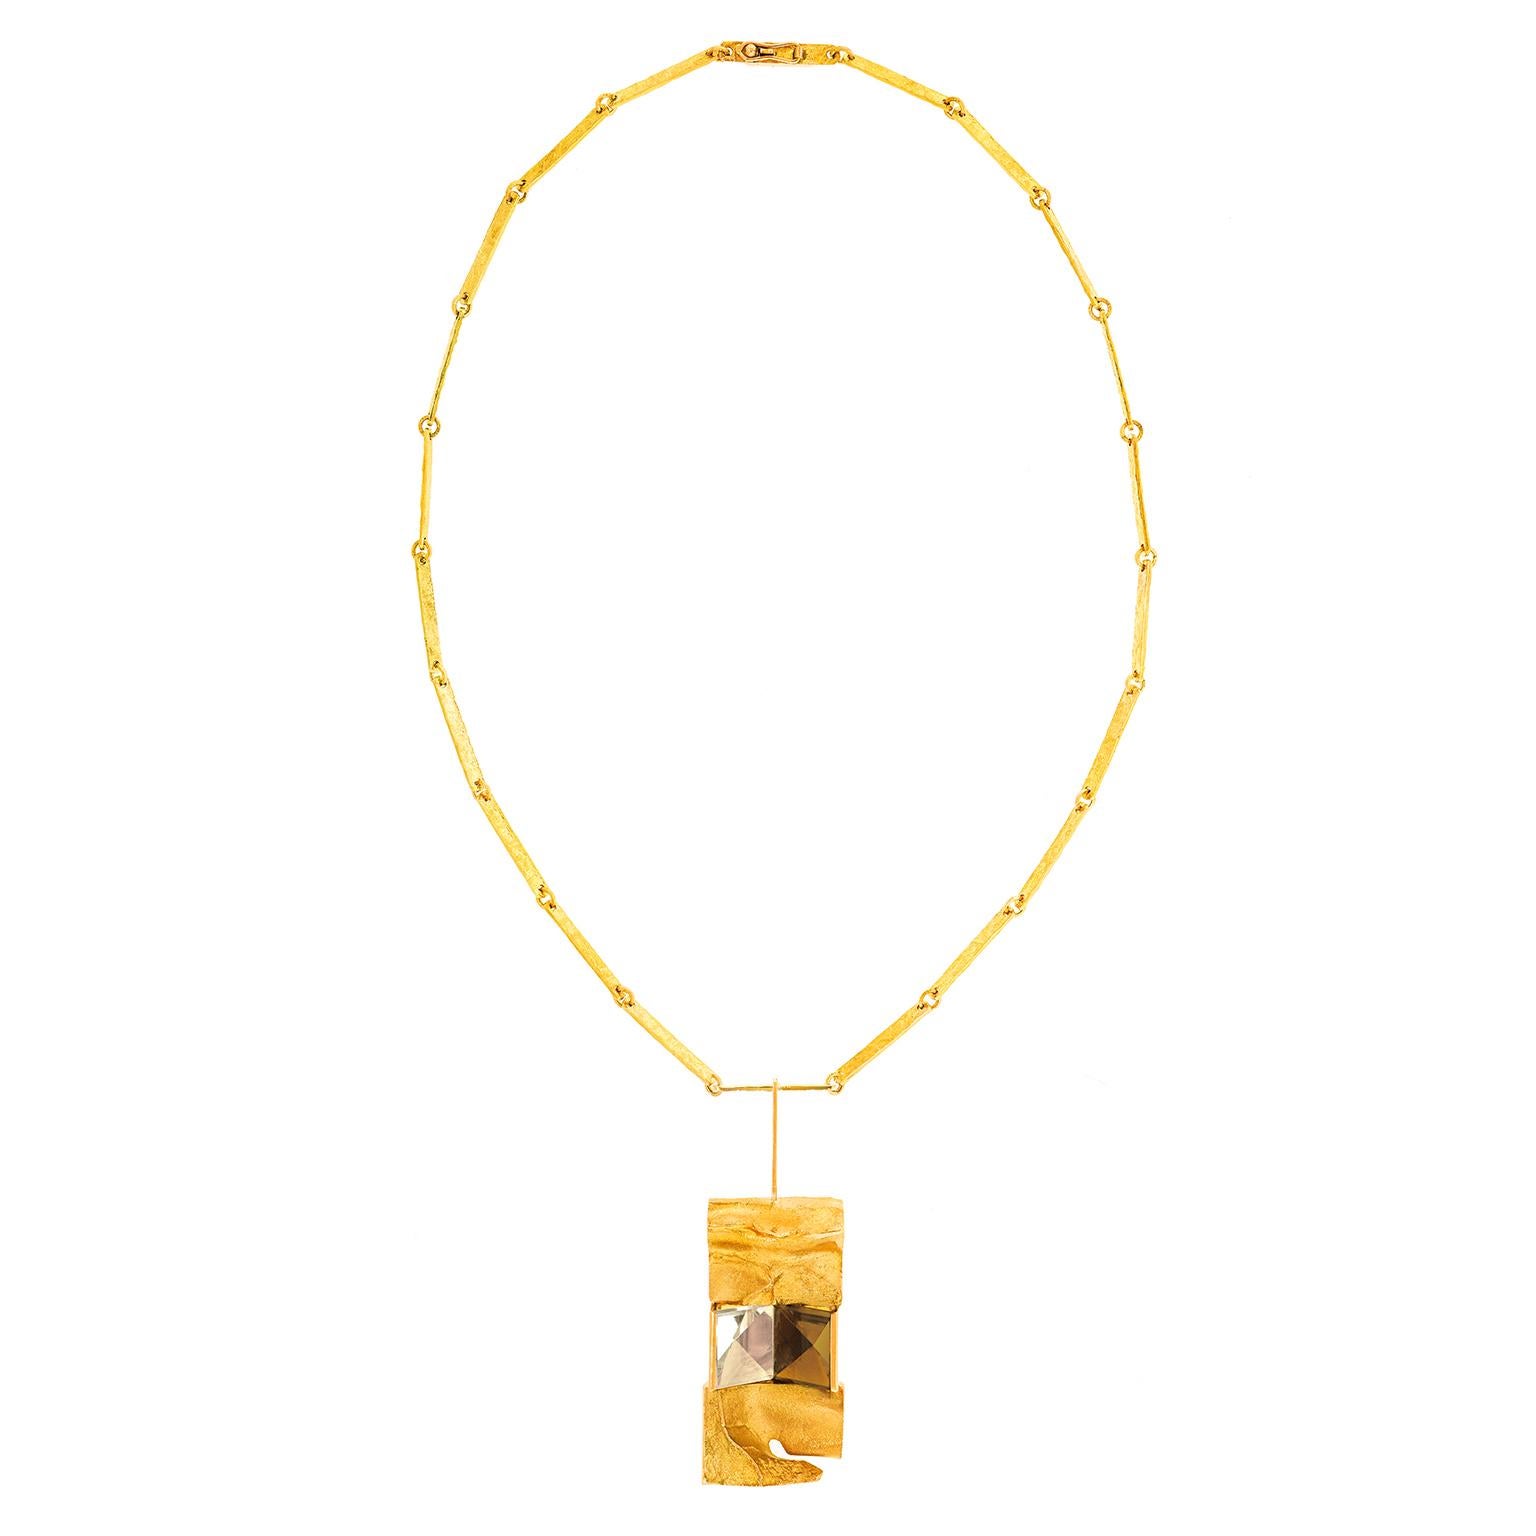 Modernist Bjorn Weckstrom Citrine and Gold Necklace 14k Dated 1971 Finland For Sale